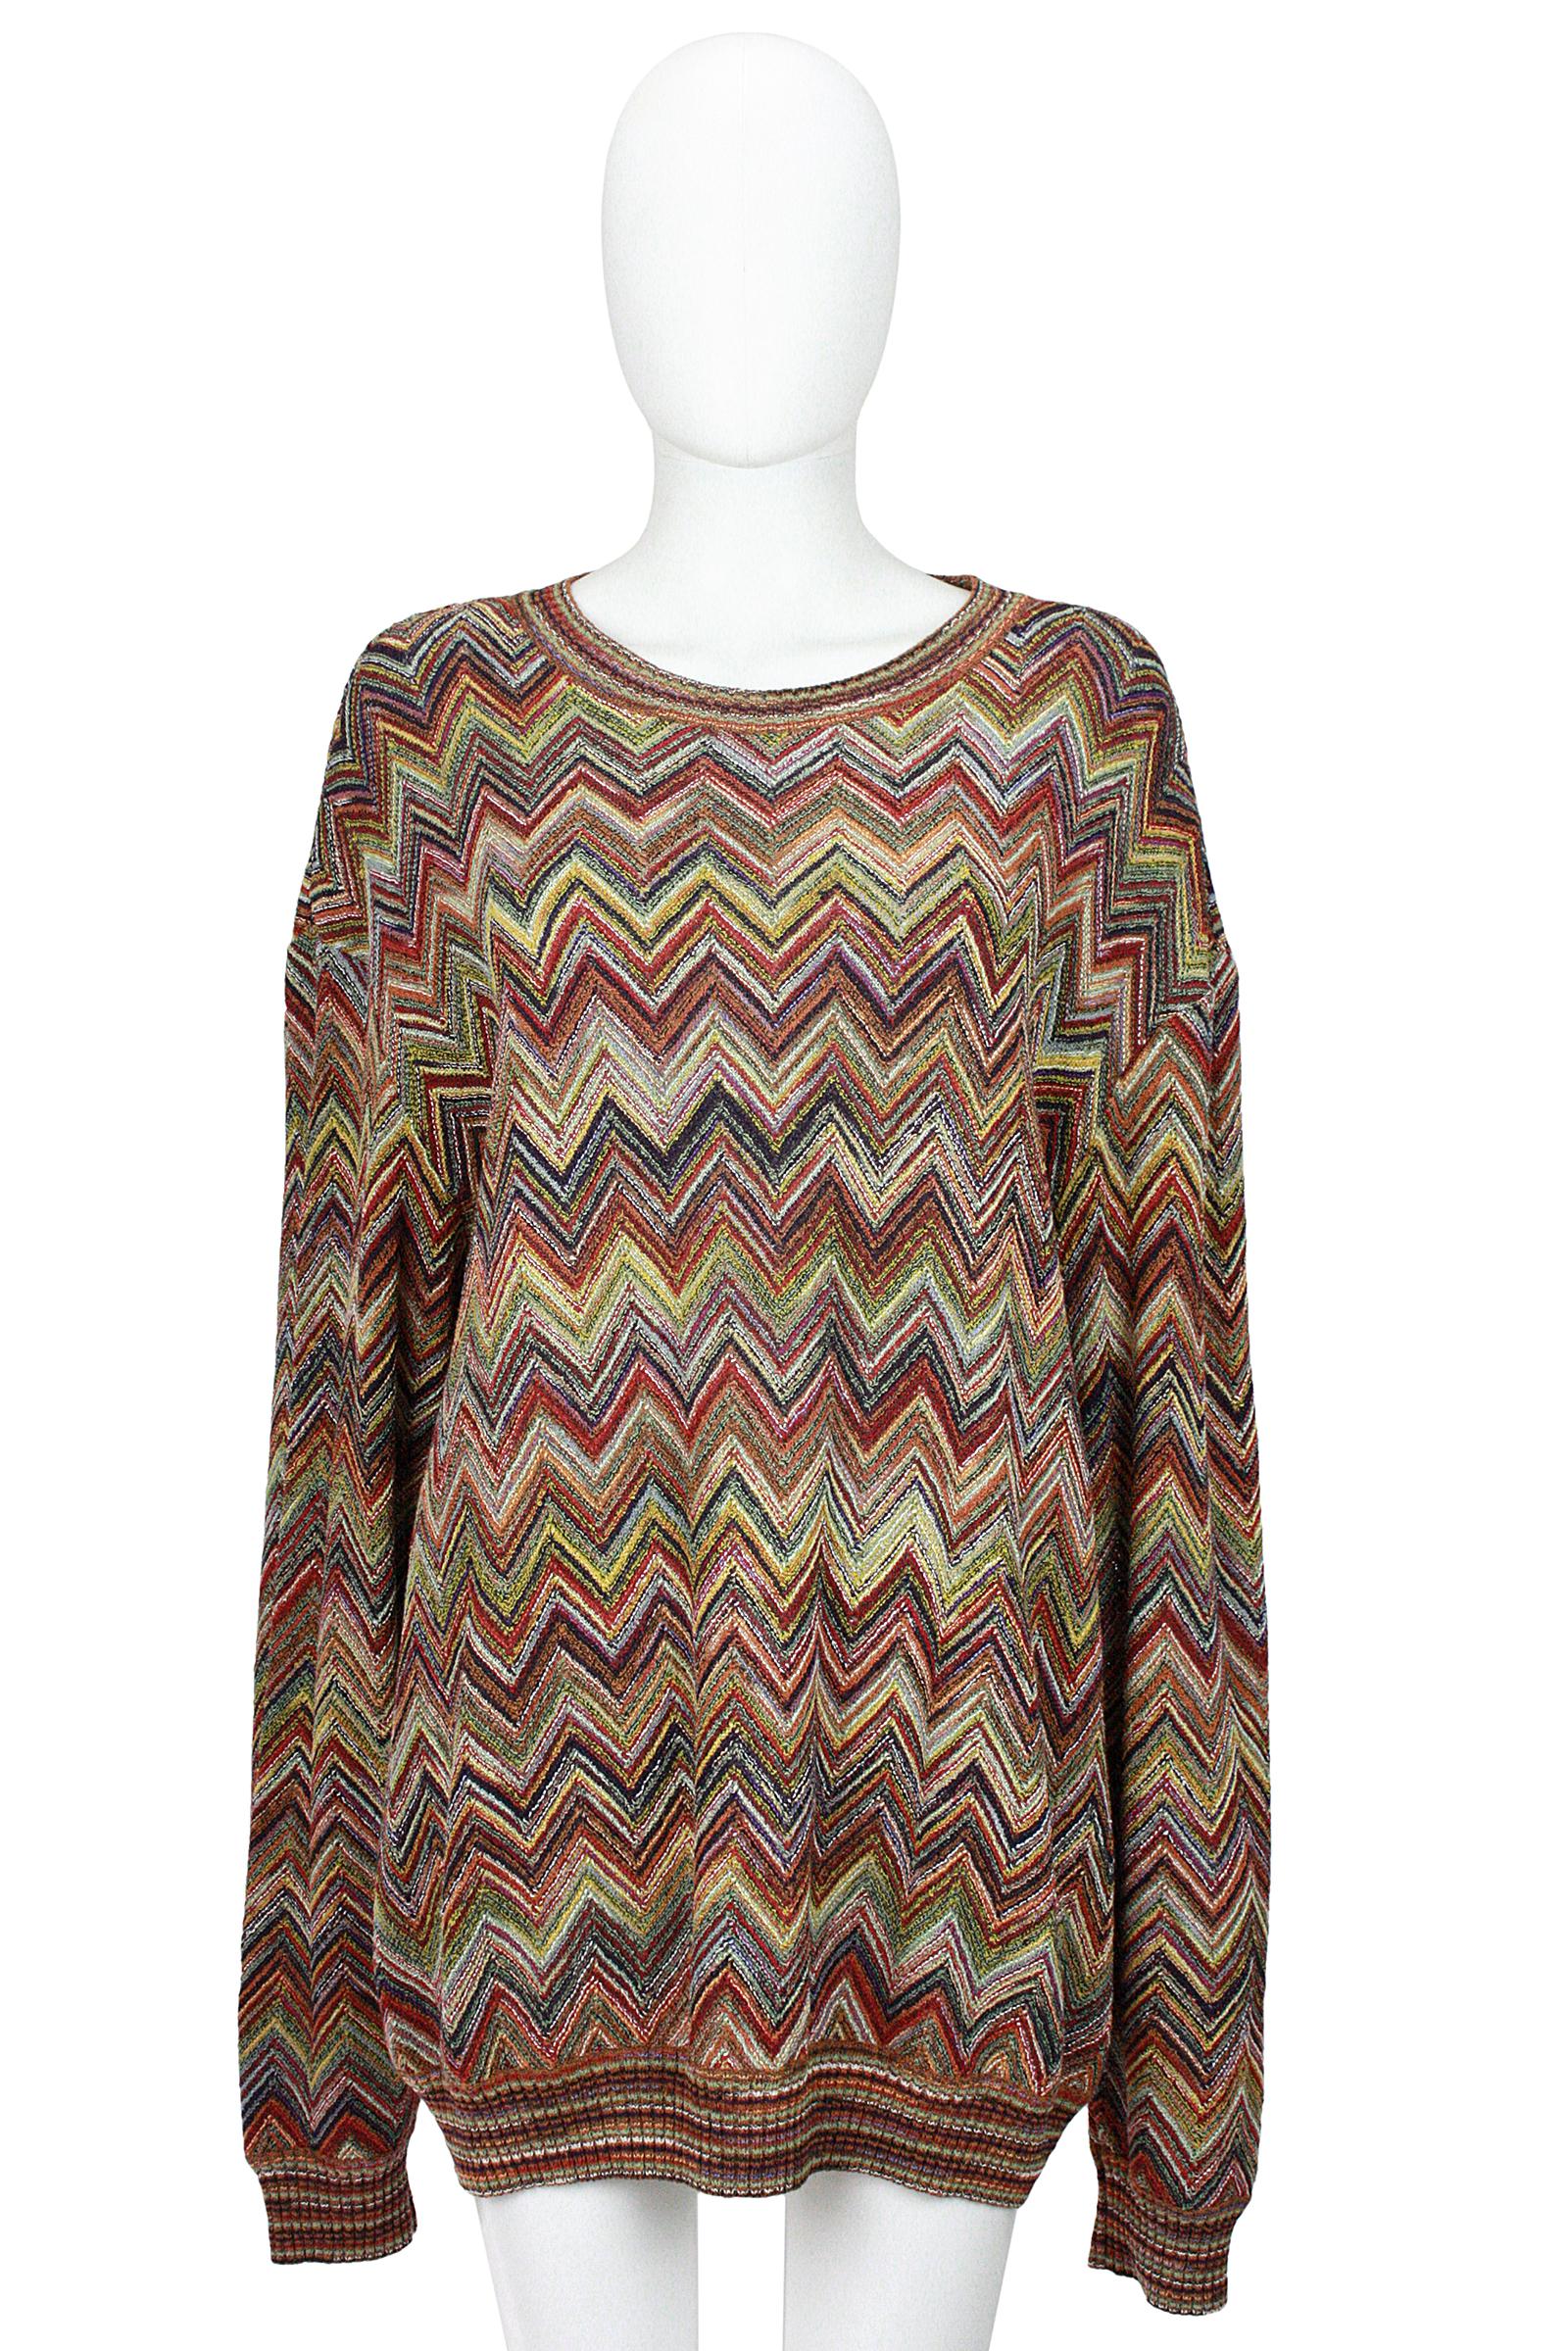 Missoni 
Knit sweater 
Knit stripe trim 
Crew neck 
Light weave that stretches 
Rayon blend
Multicolor zigzag pattern